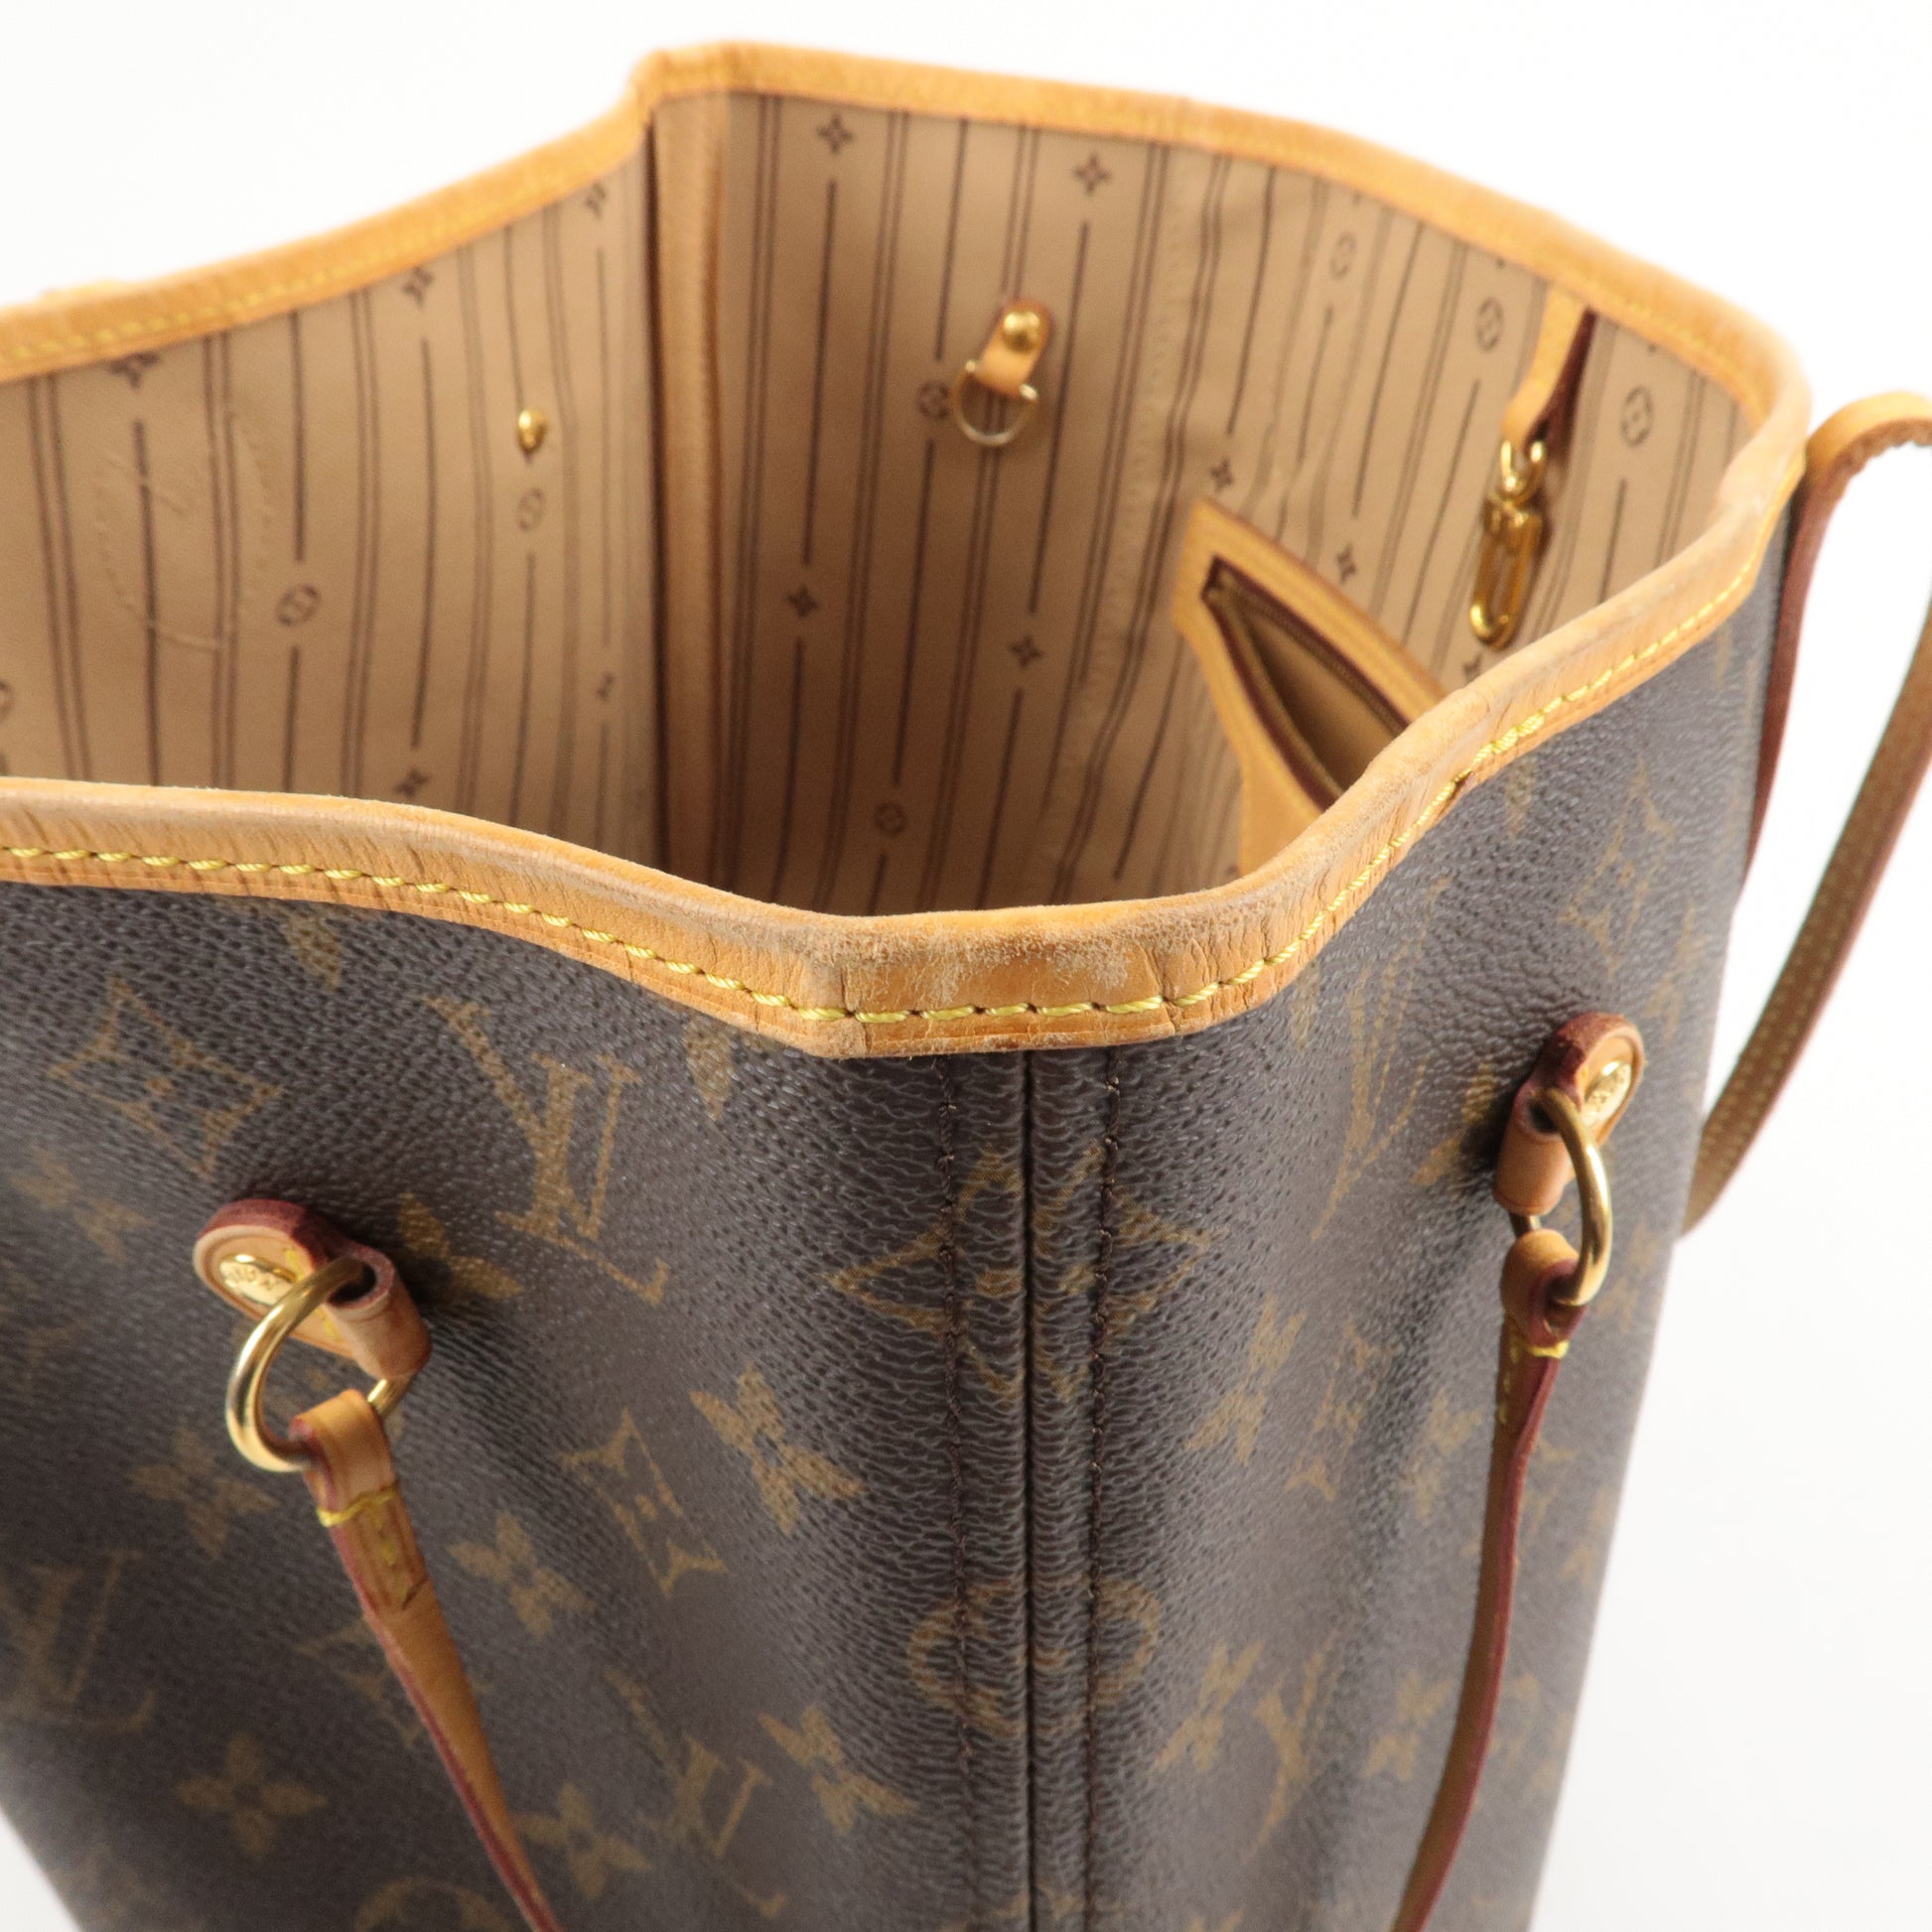 Louis Vuitton Neverfull MM Tote M40156 – Timeless Vintage Company